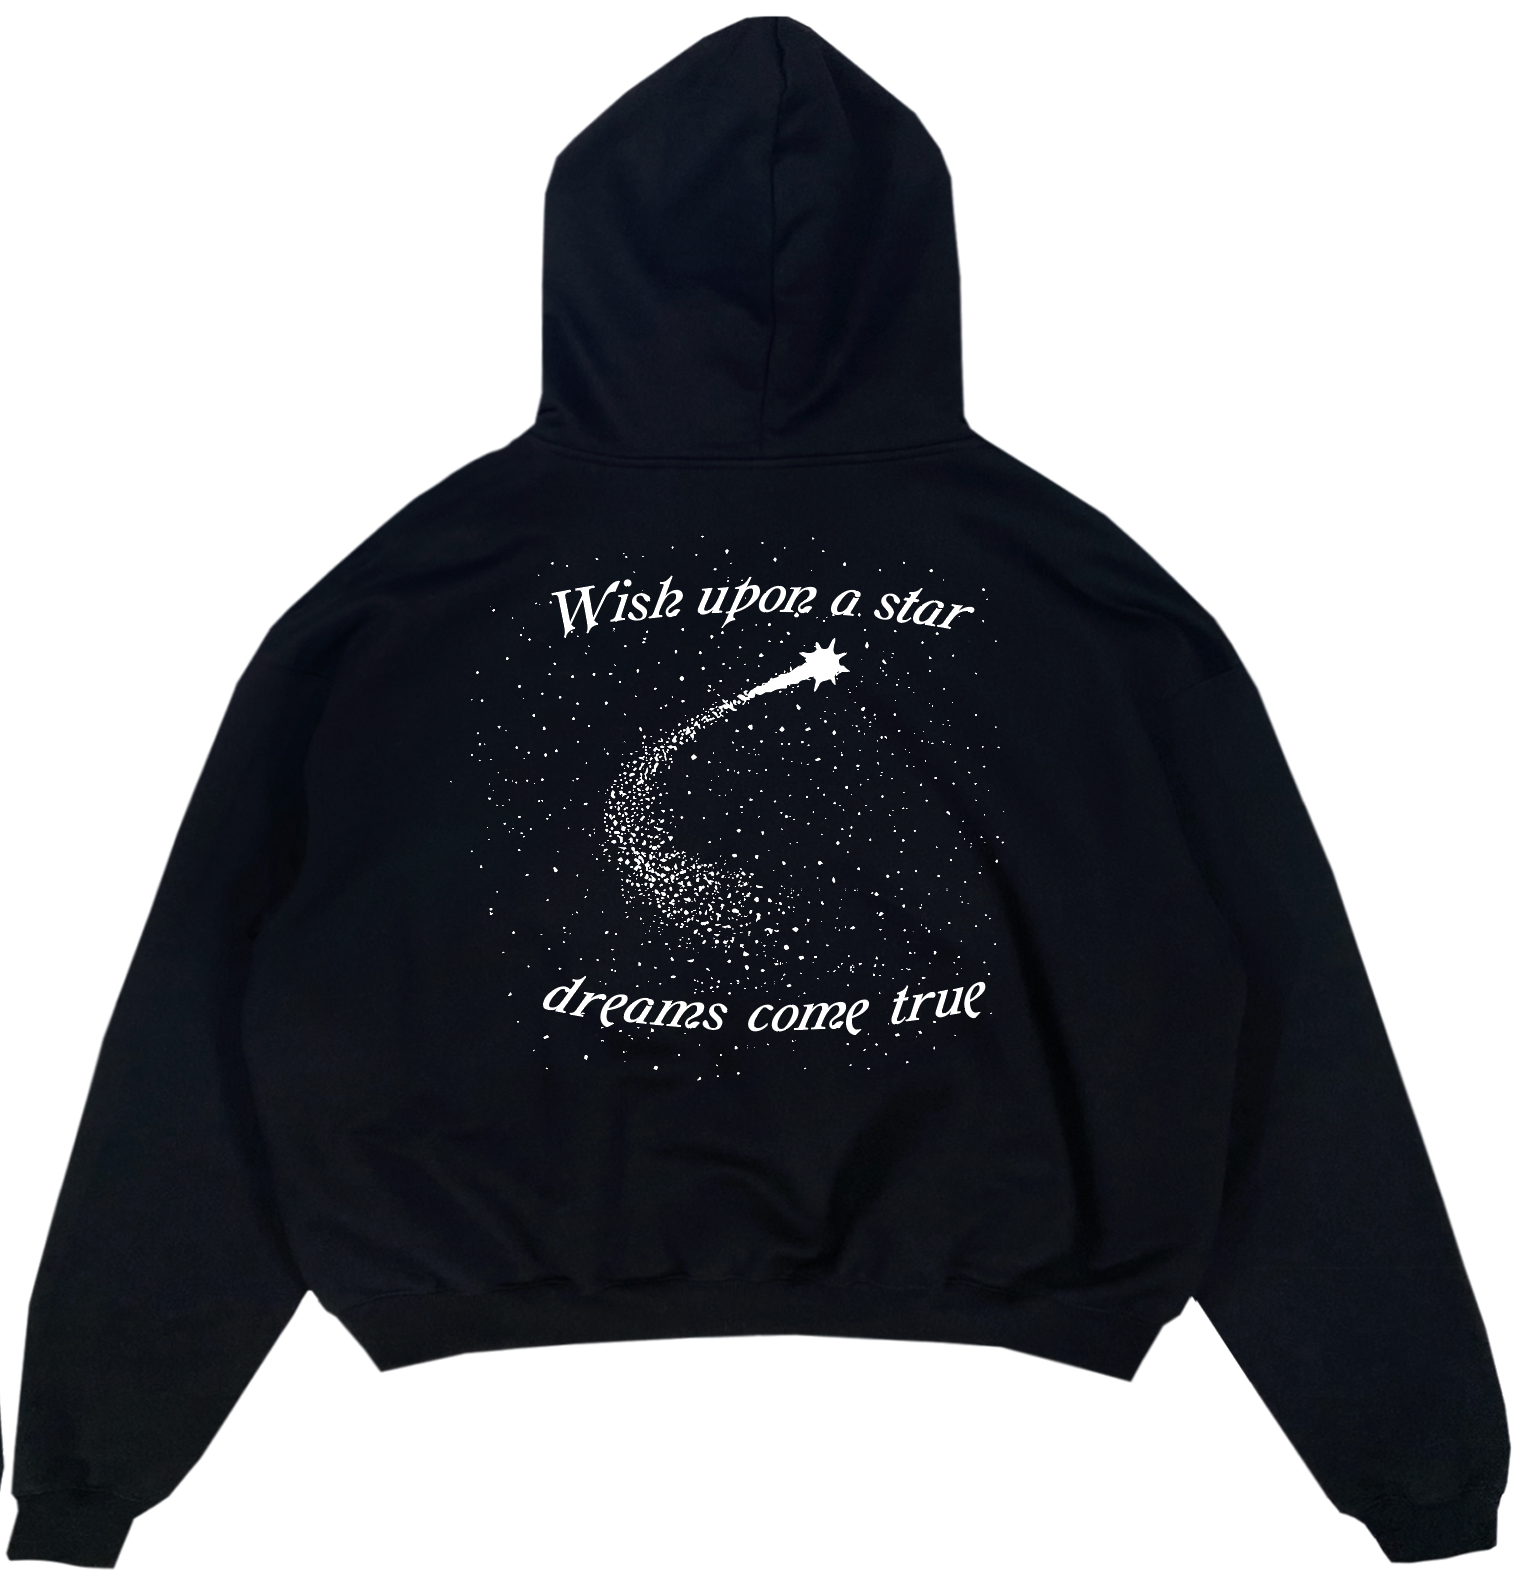 Black Hooded Sweatshirt from the Wish Upon a Star Collection